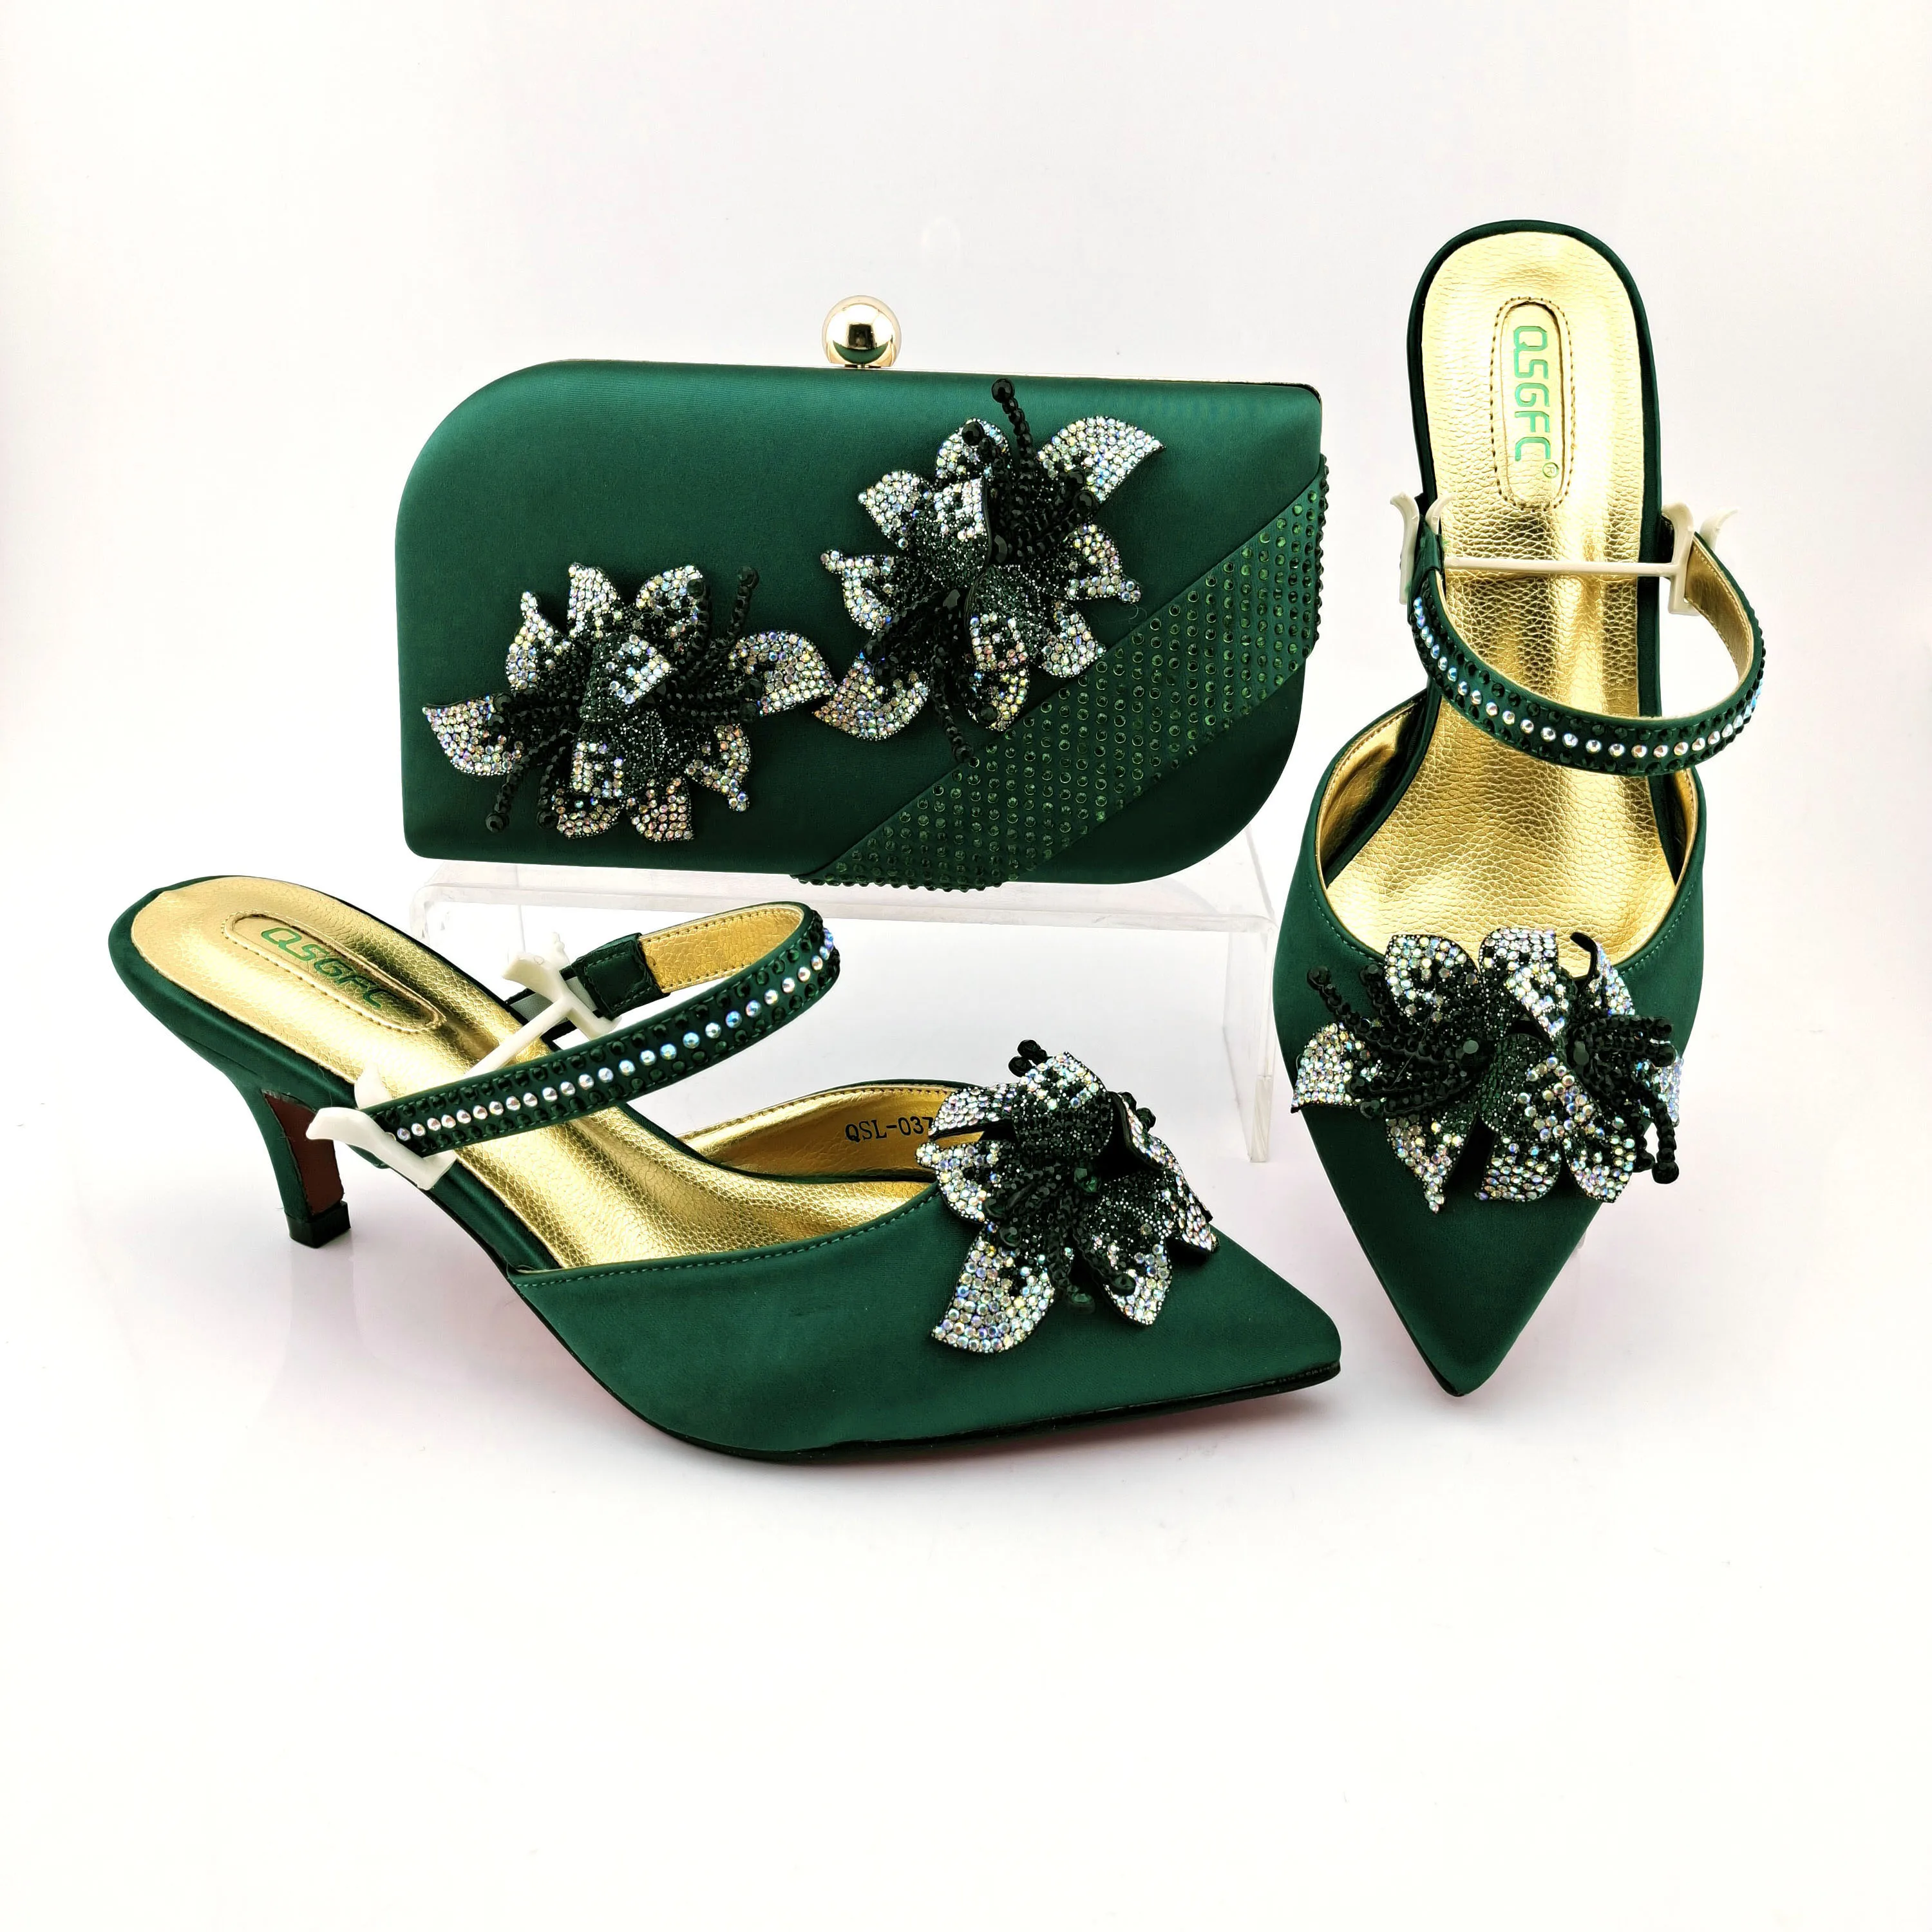 

2021 Elegant Italian Design Fashion Special Style Luxury Party Ladies Shoes and Bag Set Decorated With Rhinestone in Teal Color